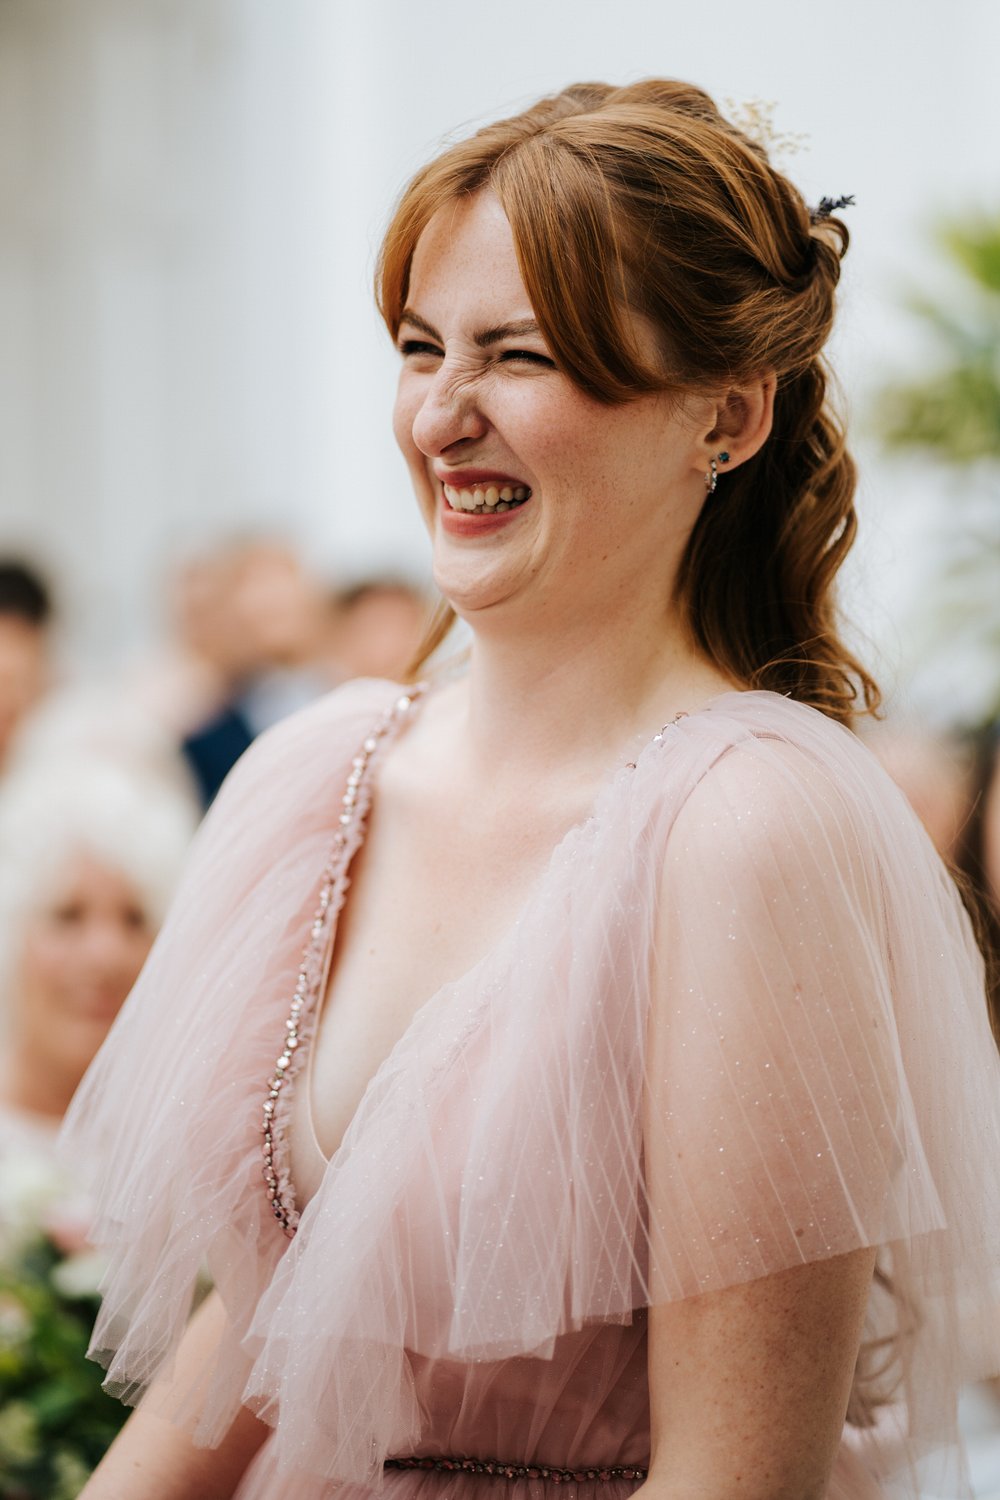 Bride wearing pink dress smiles and smirks in close-up photograph during wedding ceremony at York House